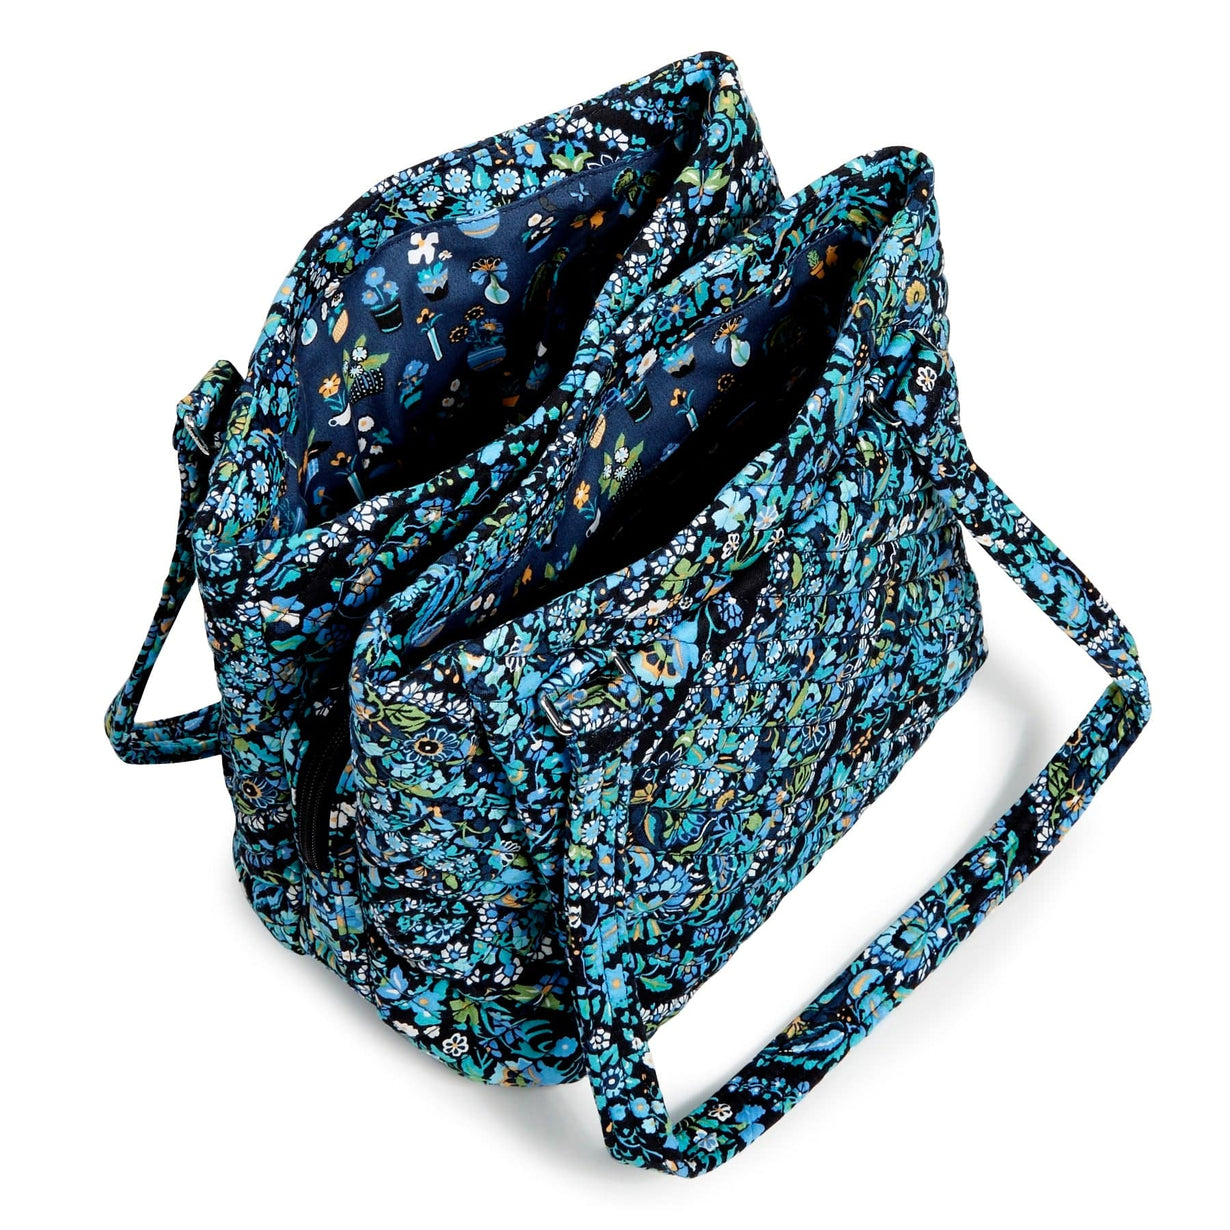 Multi-Compartment Shoulder Bag - Recycled Cotton